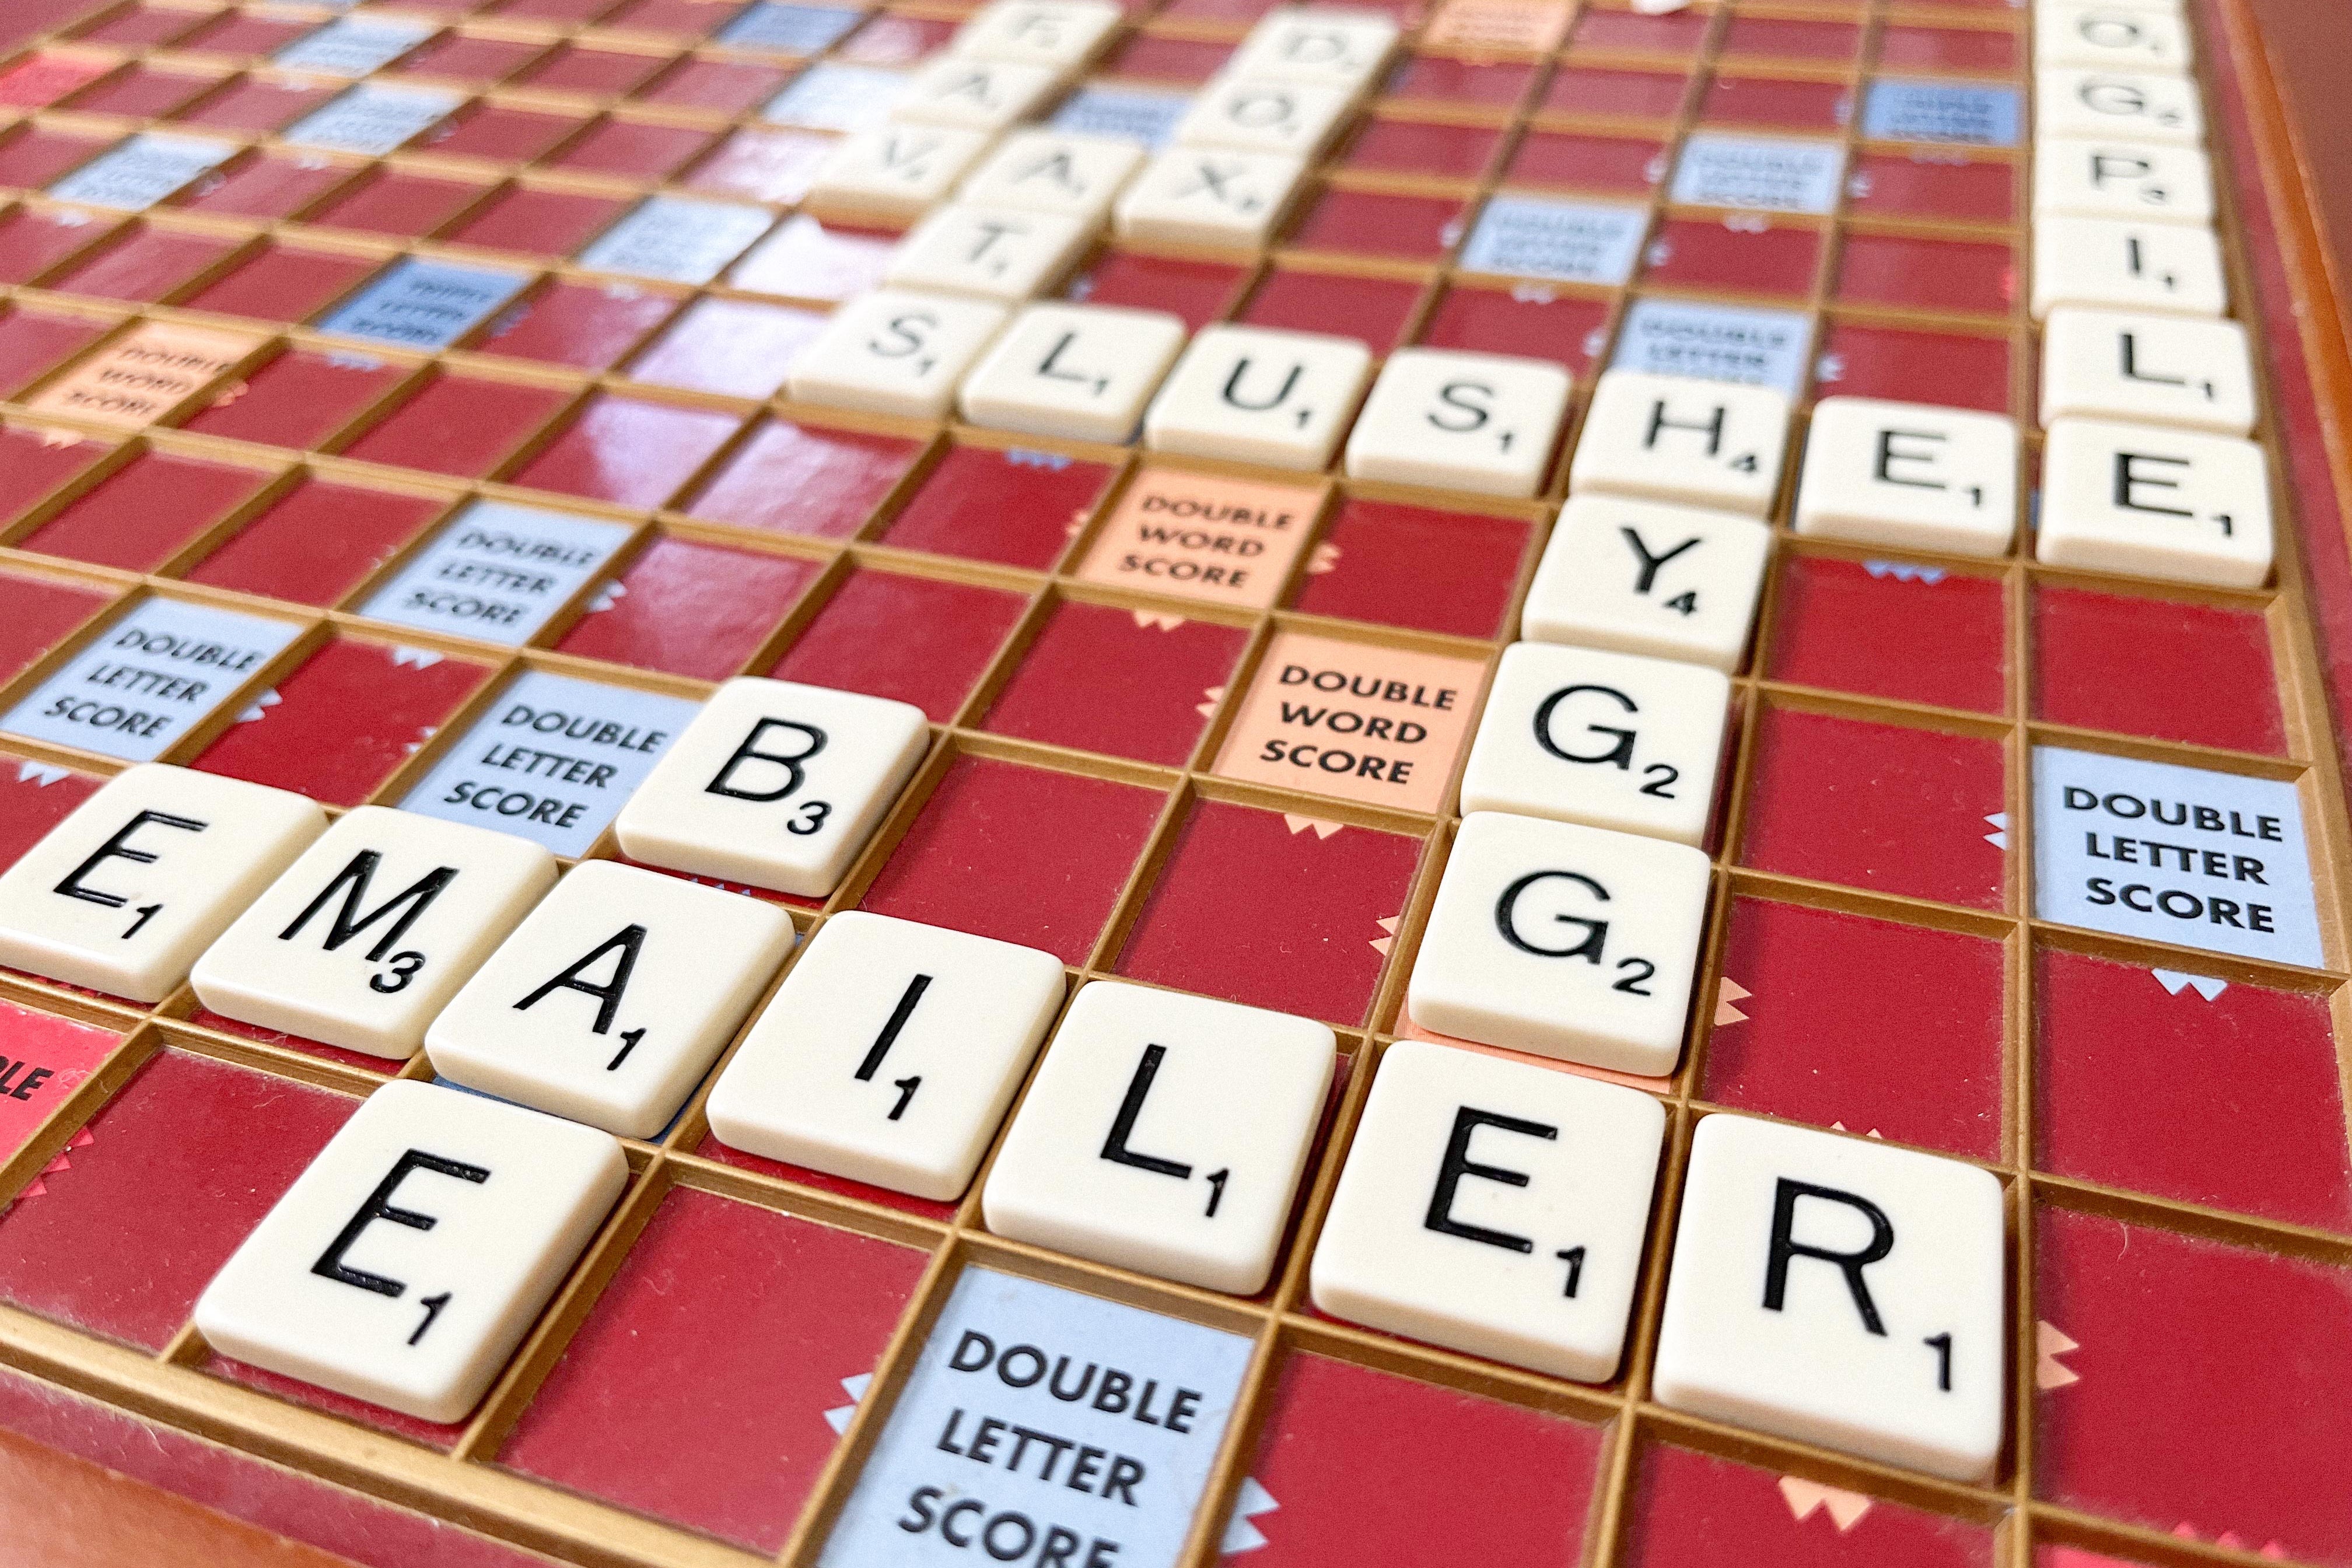 A Scrabble board with some of the new words arranged in a grid on it: Bae, Emailer, Hygge, Slushee, Dogpile, Vax, Ats, Fav, and Dox